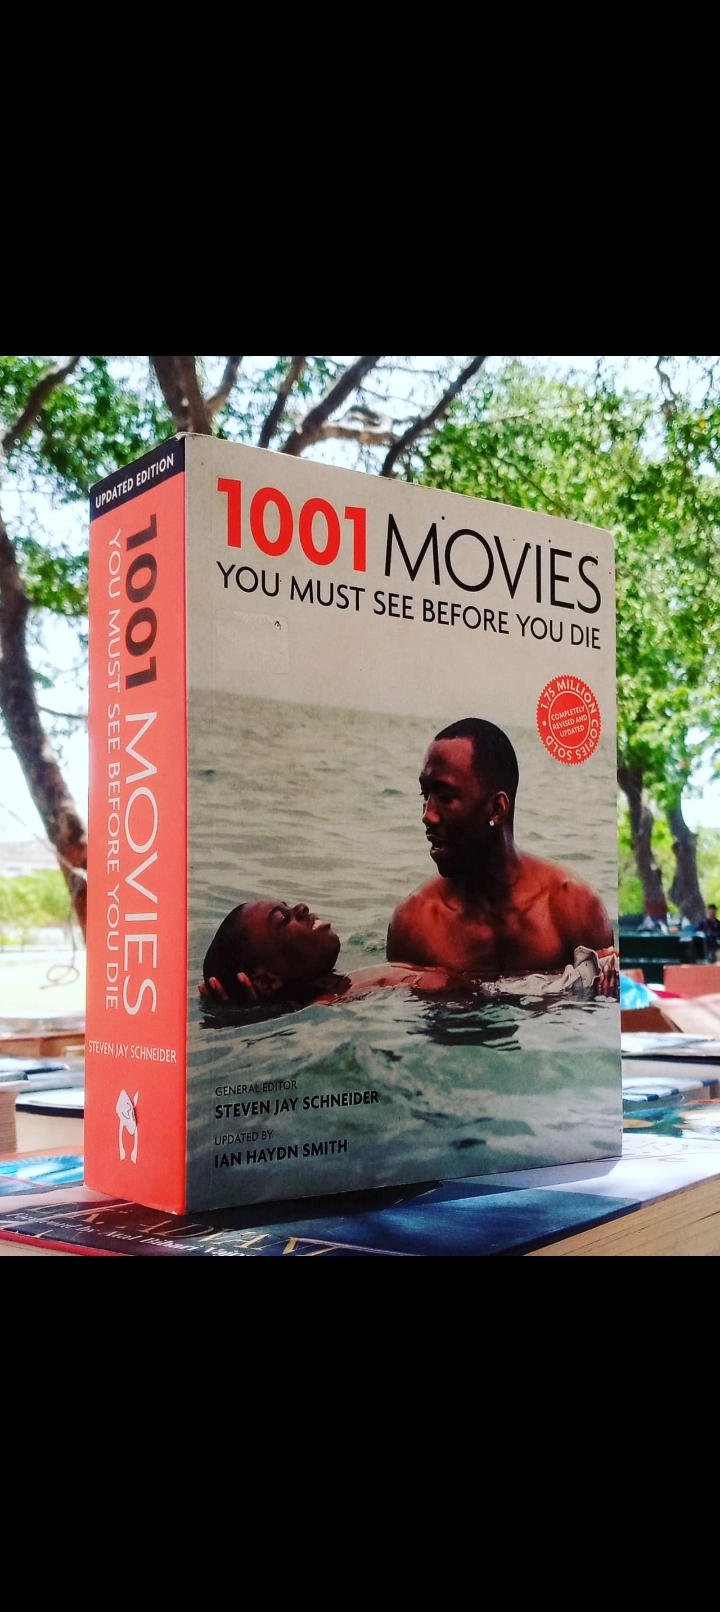 1001 movies you must see before you die.updated edition 1.75 million copies sold.original paperback